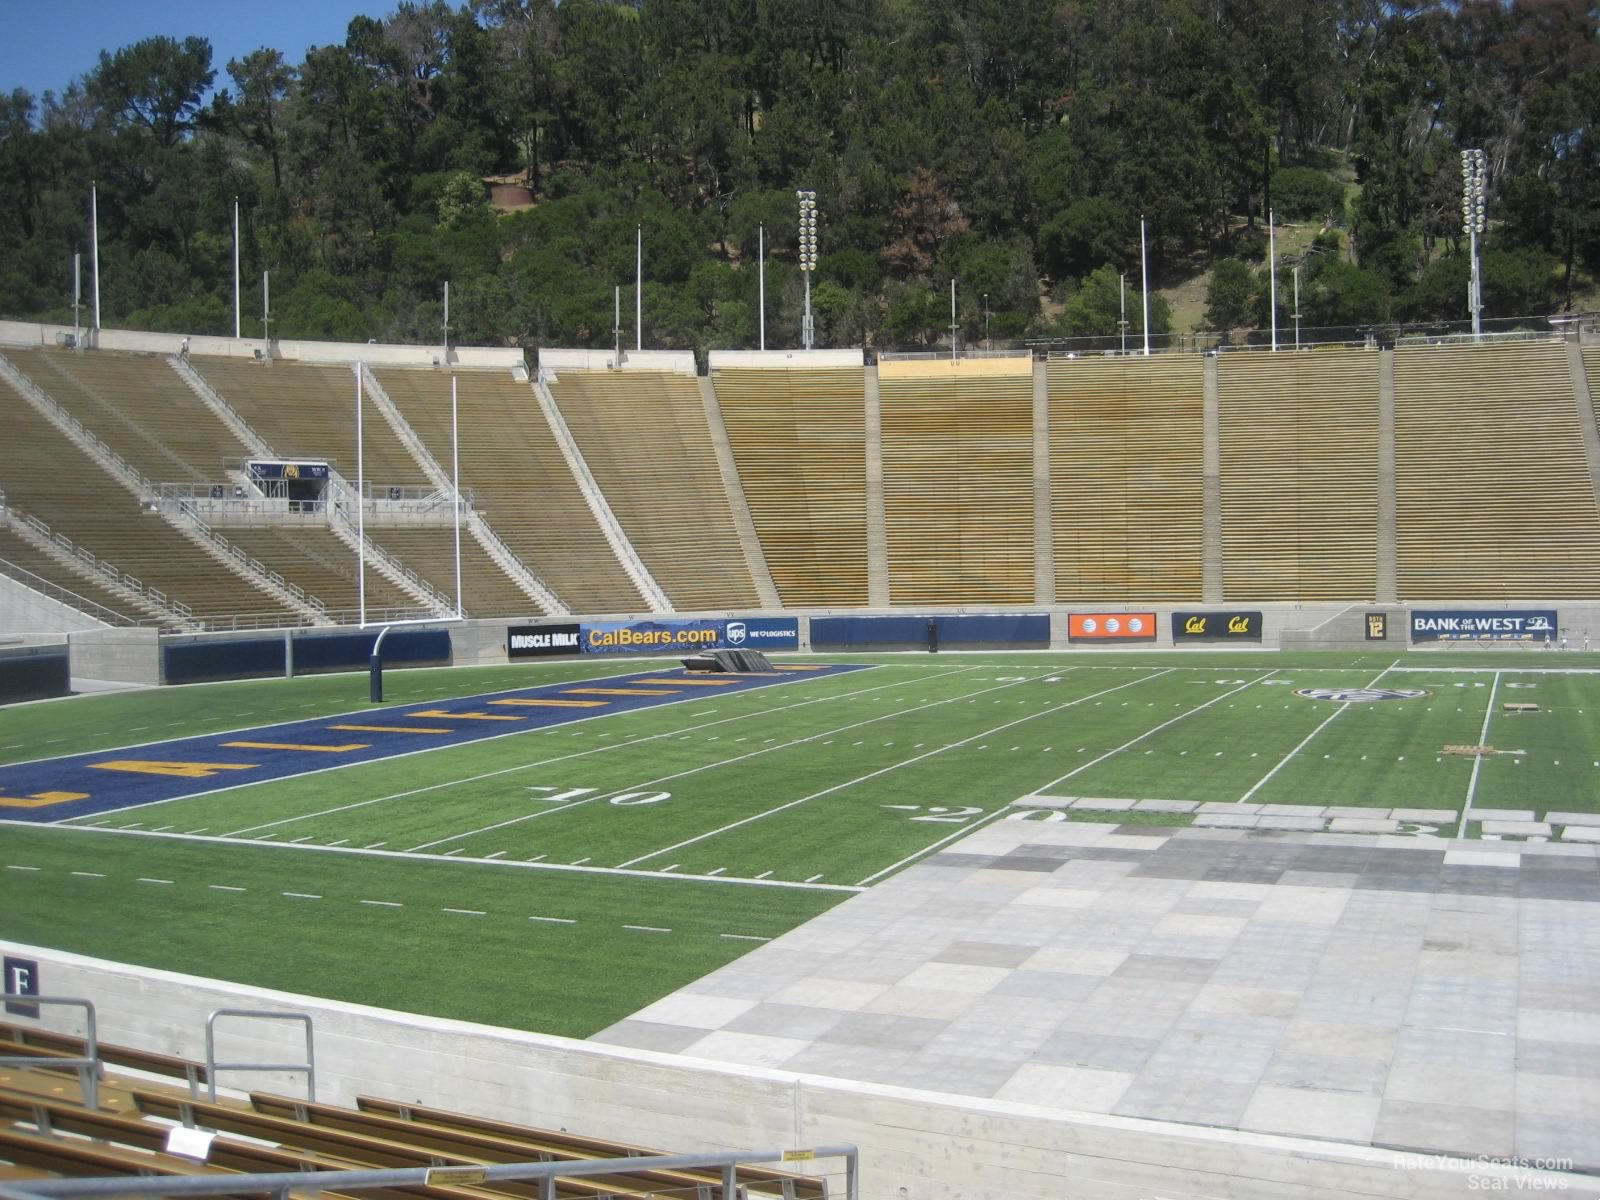 section ff, row 9 seat view  - memorial stadium (cal)